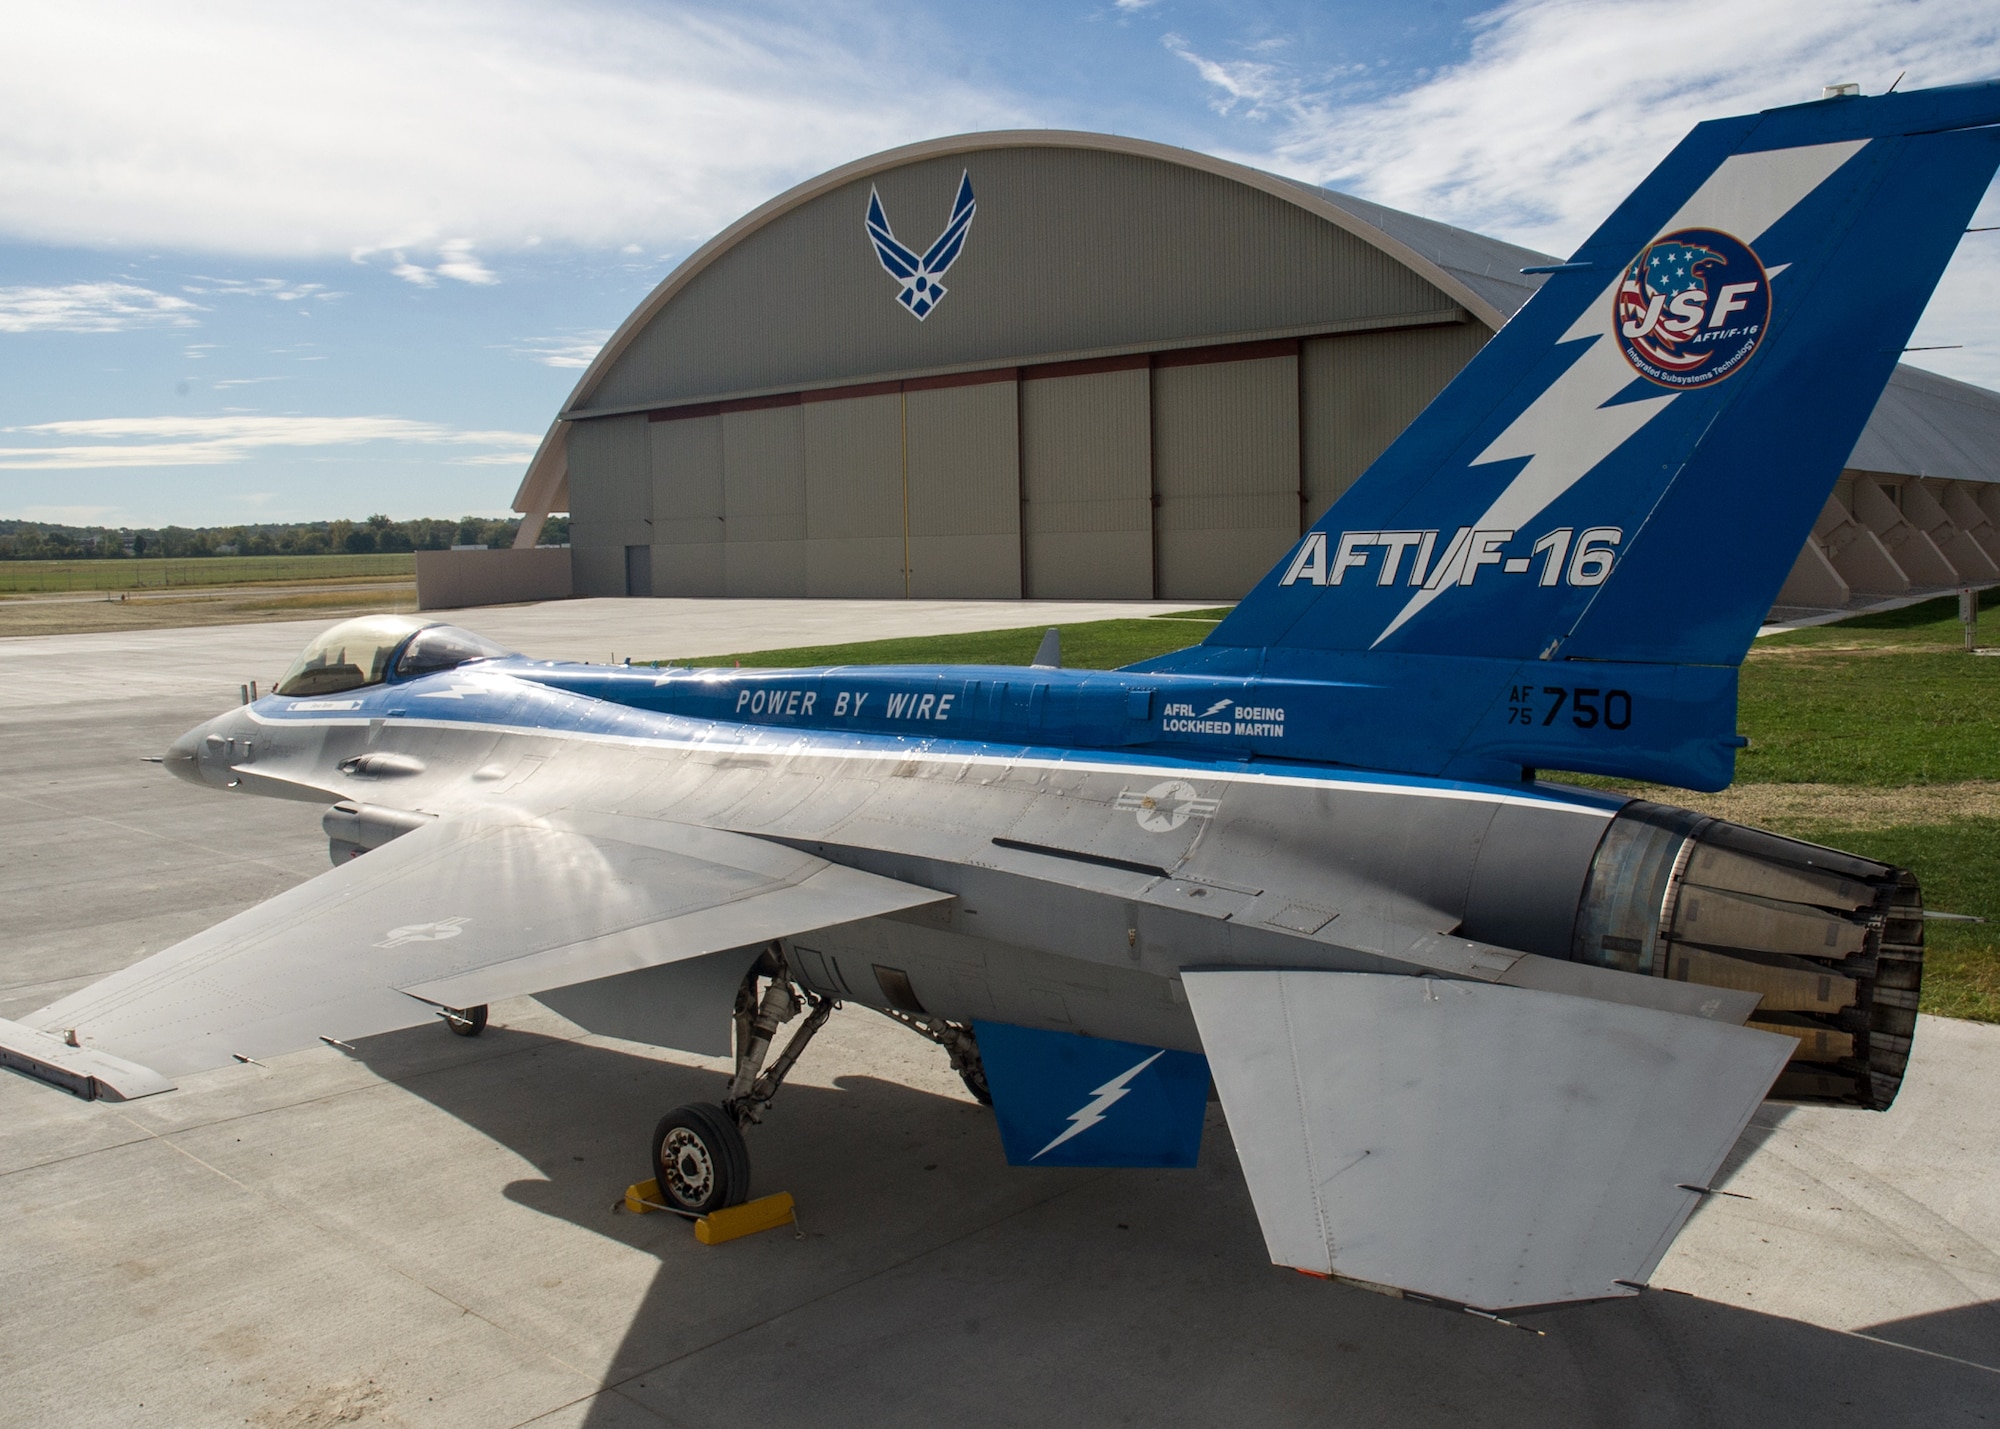 Restoration staff move the General Dynamics NF-16A AFTI into the new fourth building at the National Museum of the U.S. Air Force on Oct. 6, 2015. (U.S. Air Force photo by Ken LaRock)